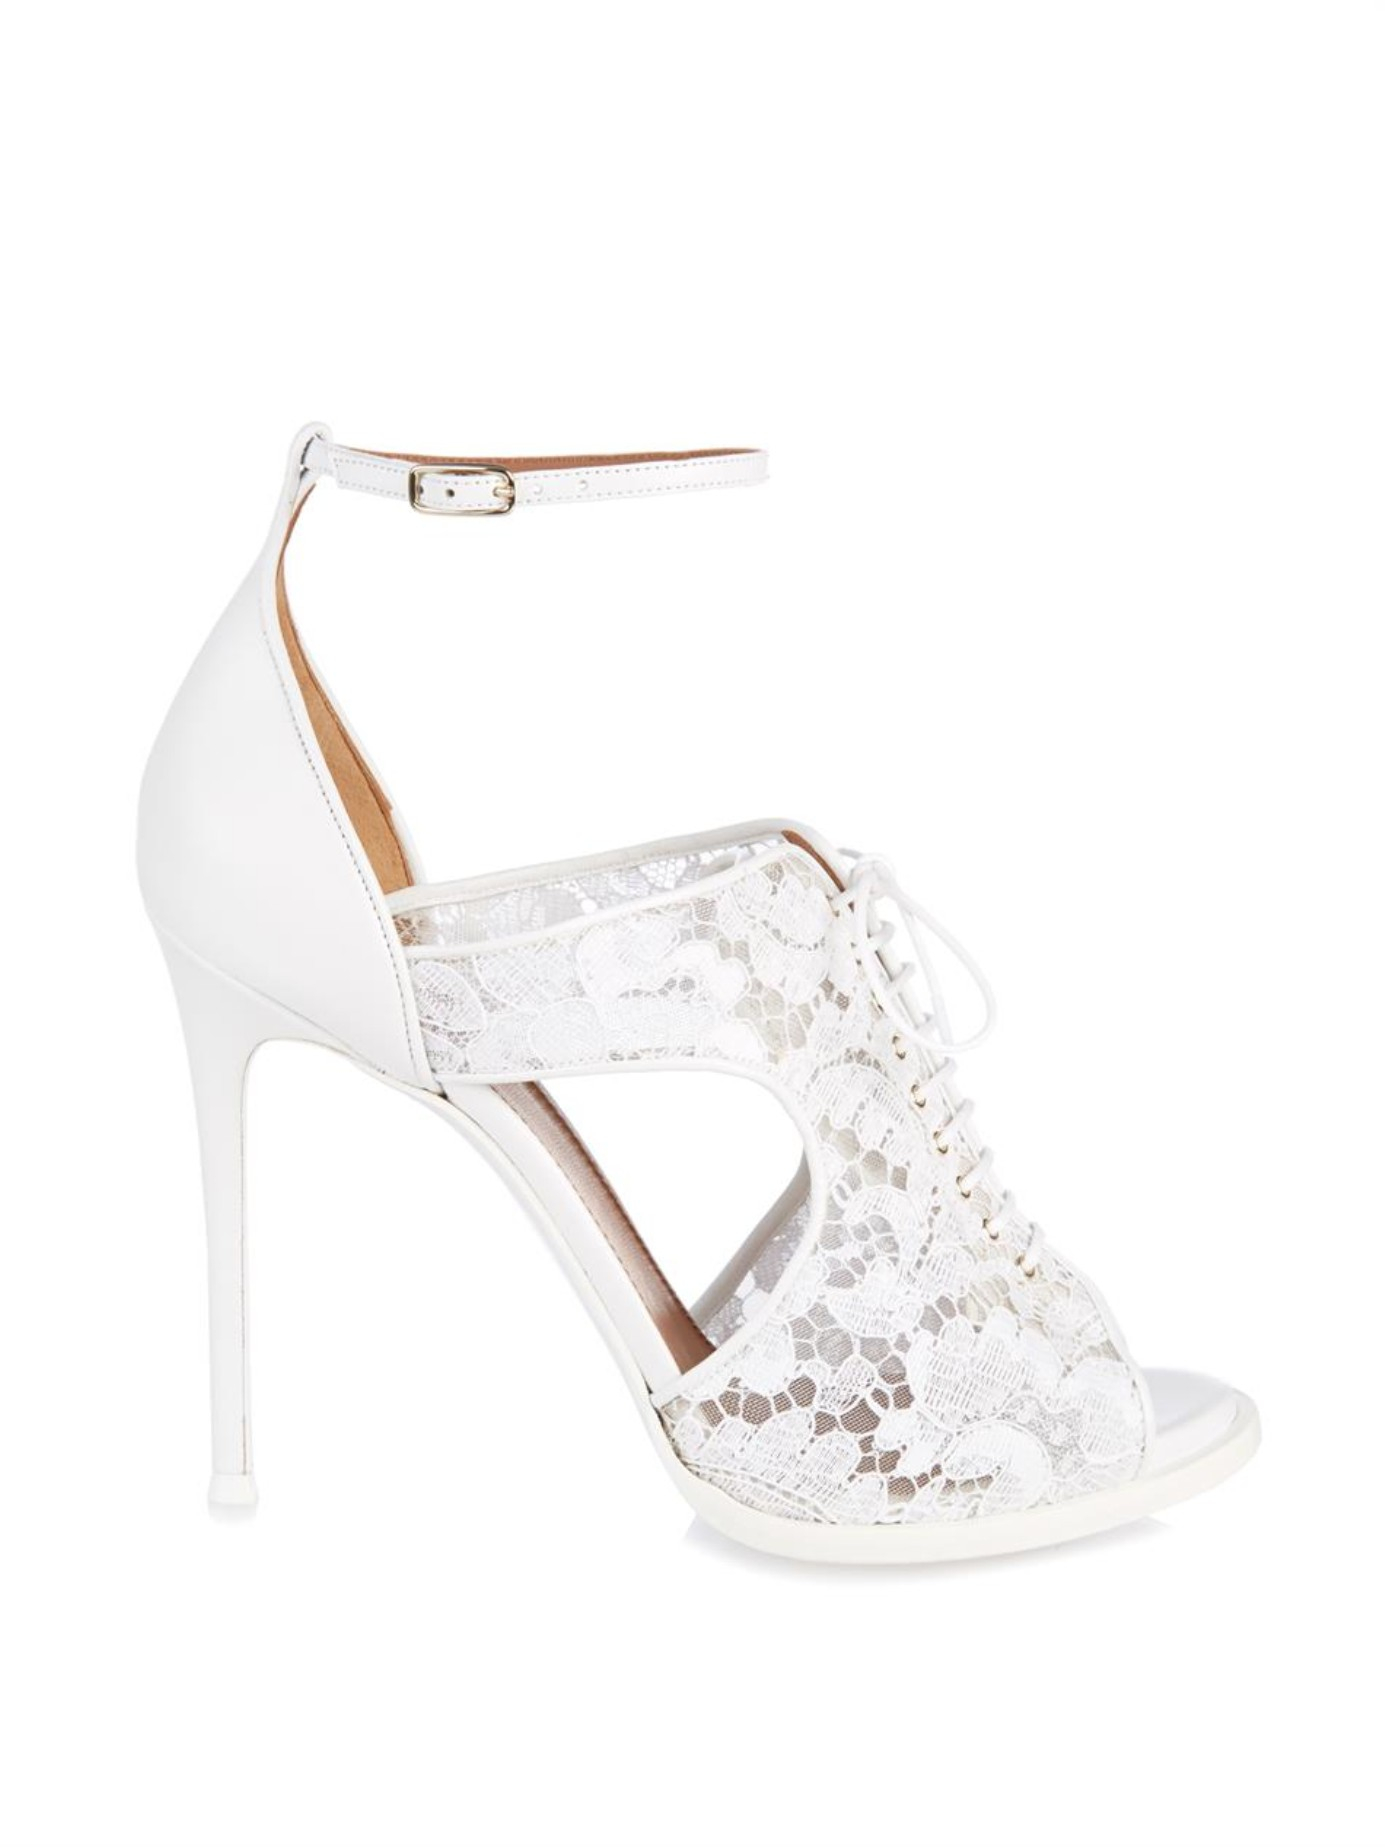 givenchy white heels